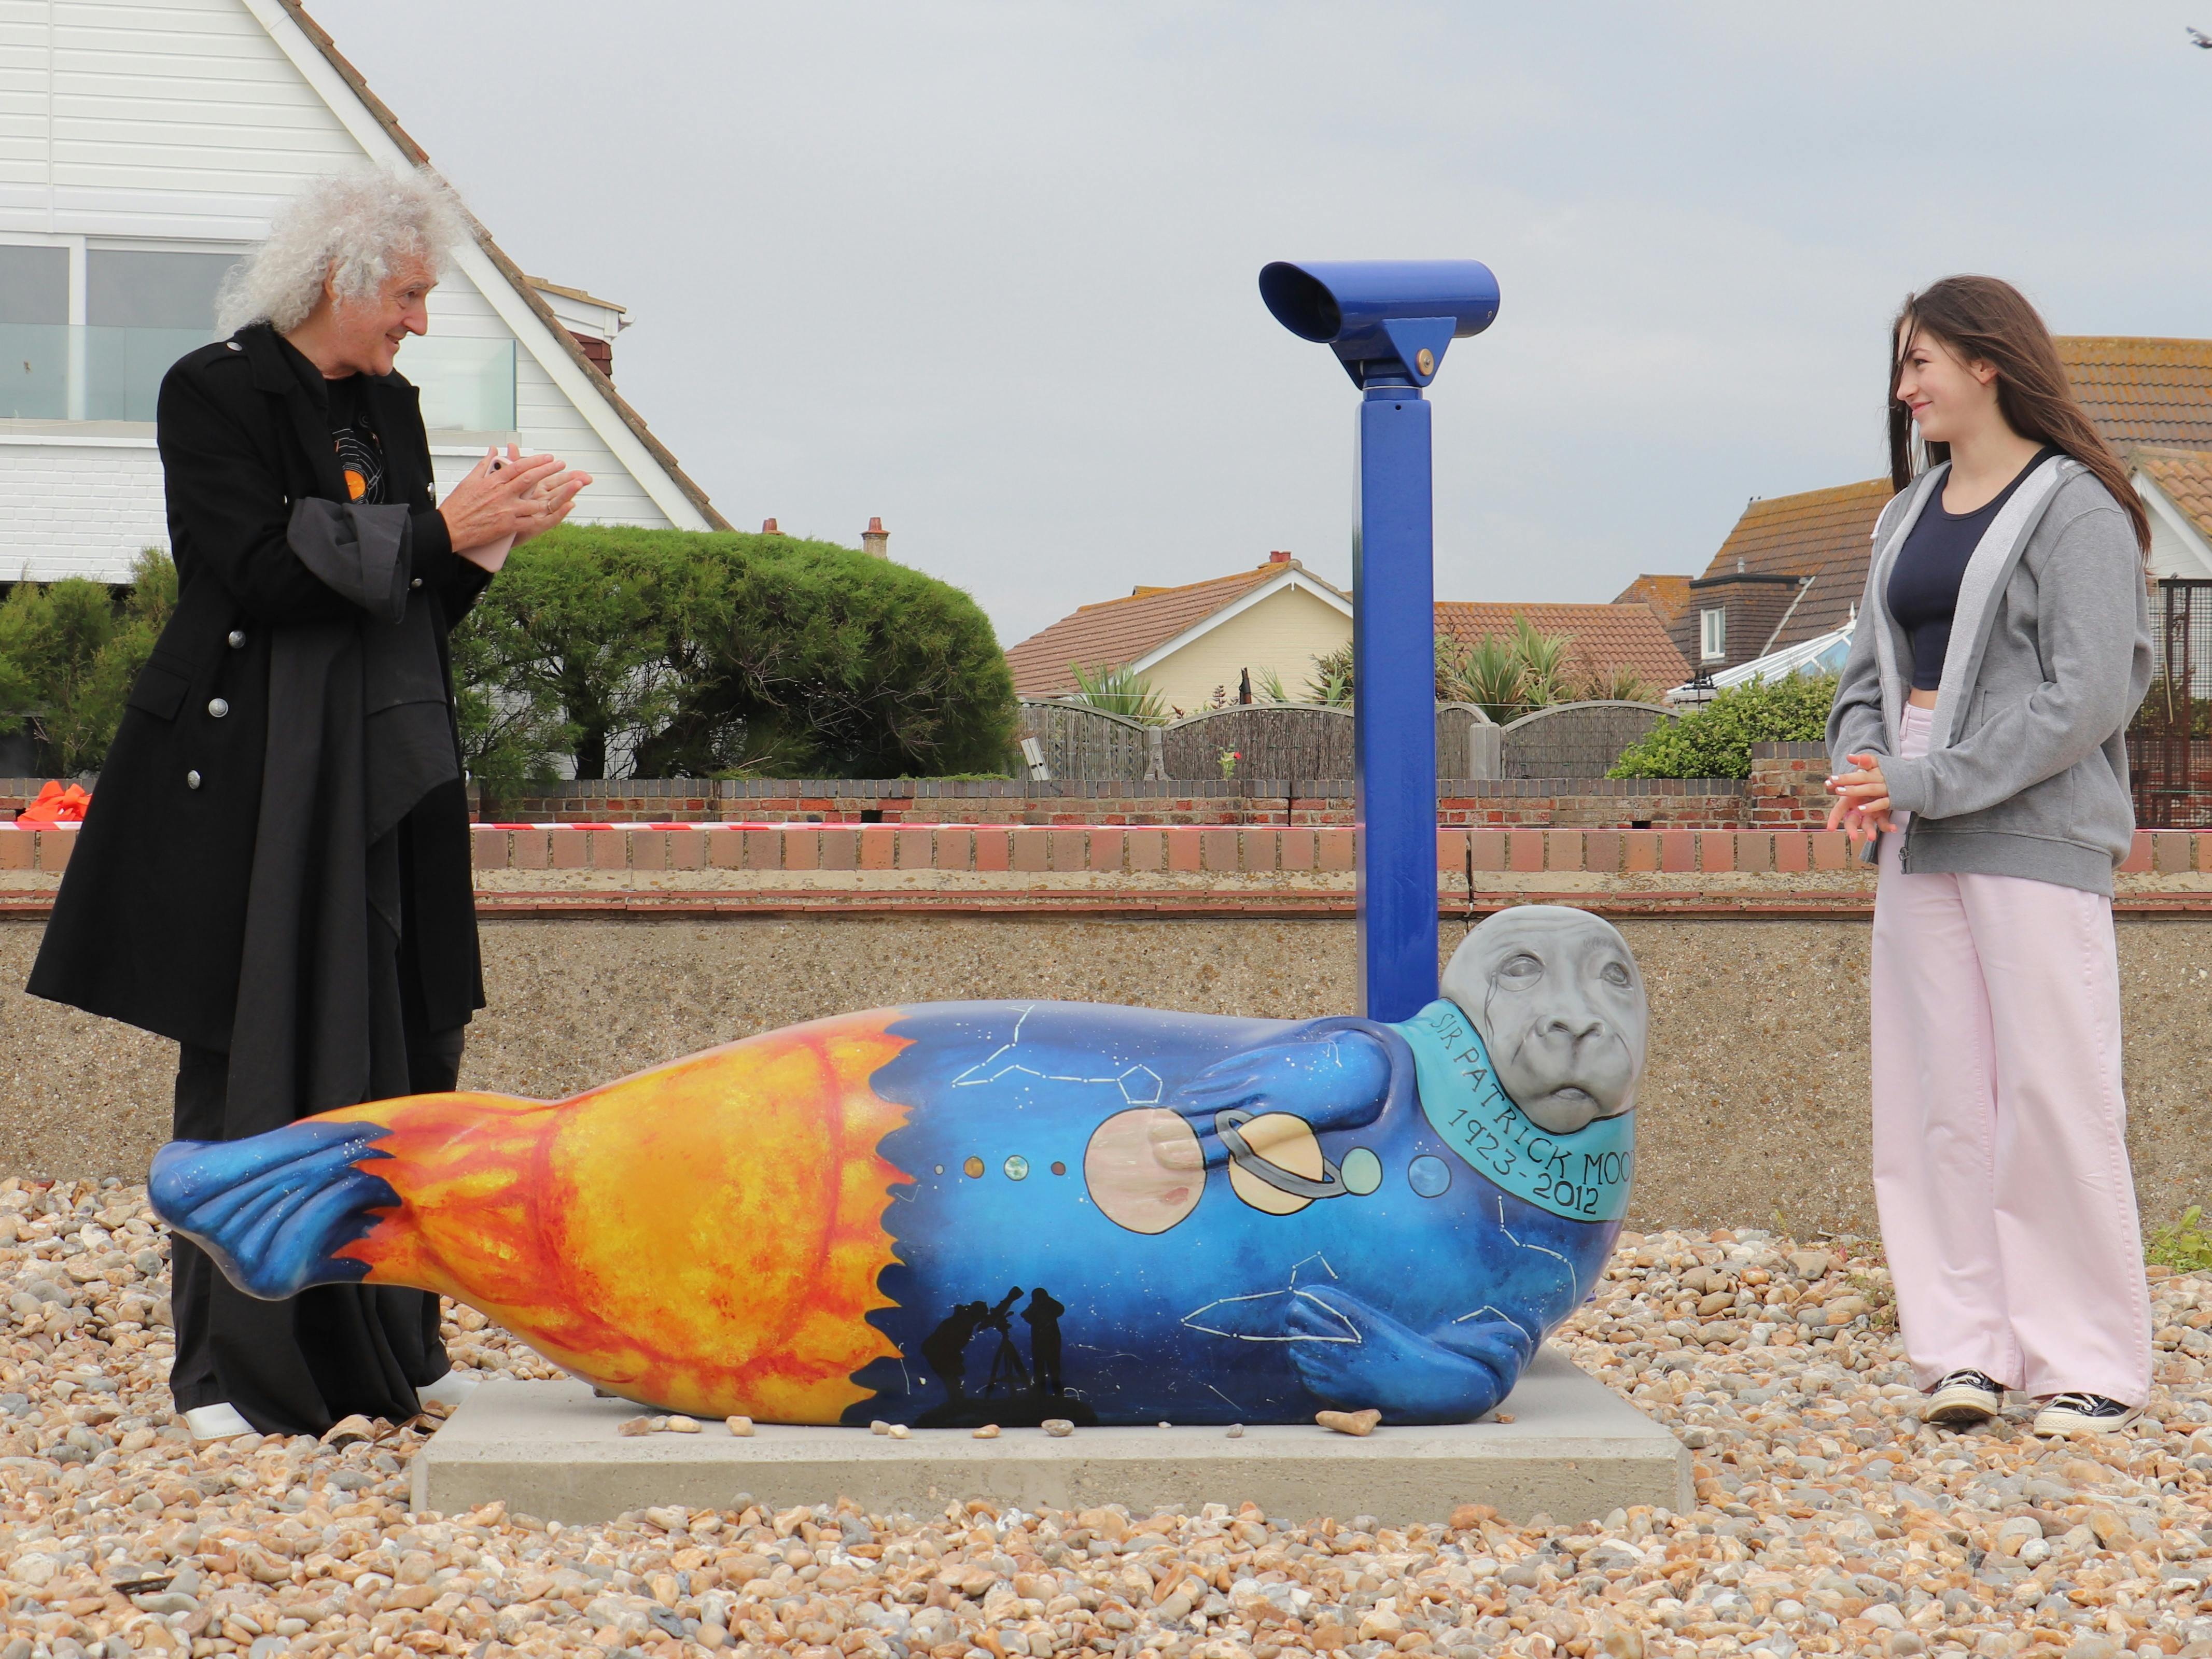 Sir Patrick Moore and Selsey's Dark Skies Seal, by Art Student Megan Masters with Dr Brian May